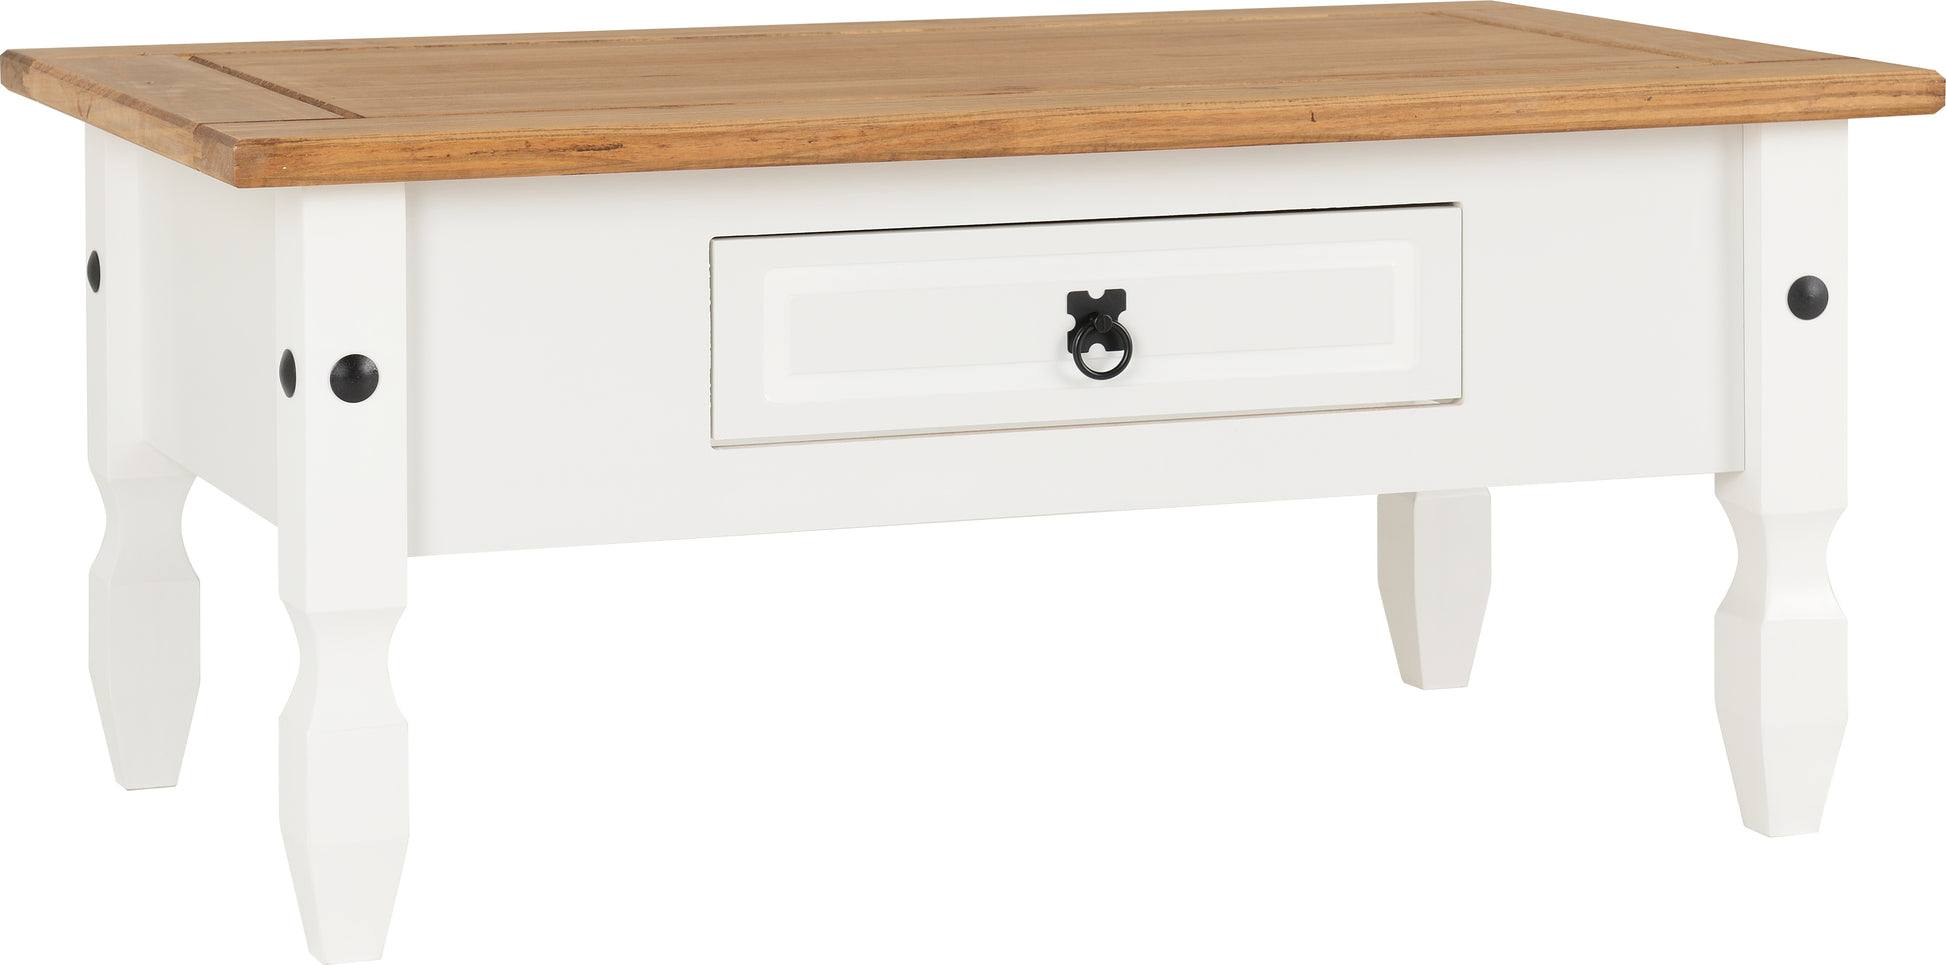 Corona 1 Drawer Coffee Table - White/Distressed Waxed Pine - The Right Buy Store